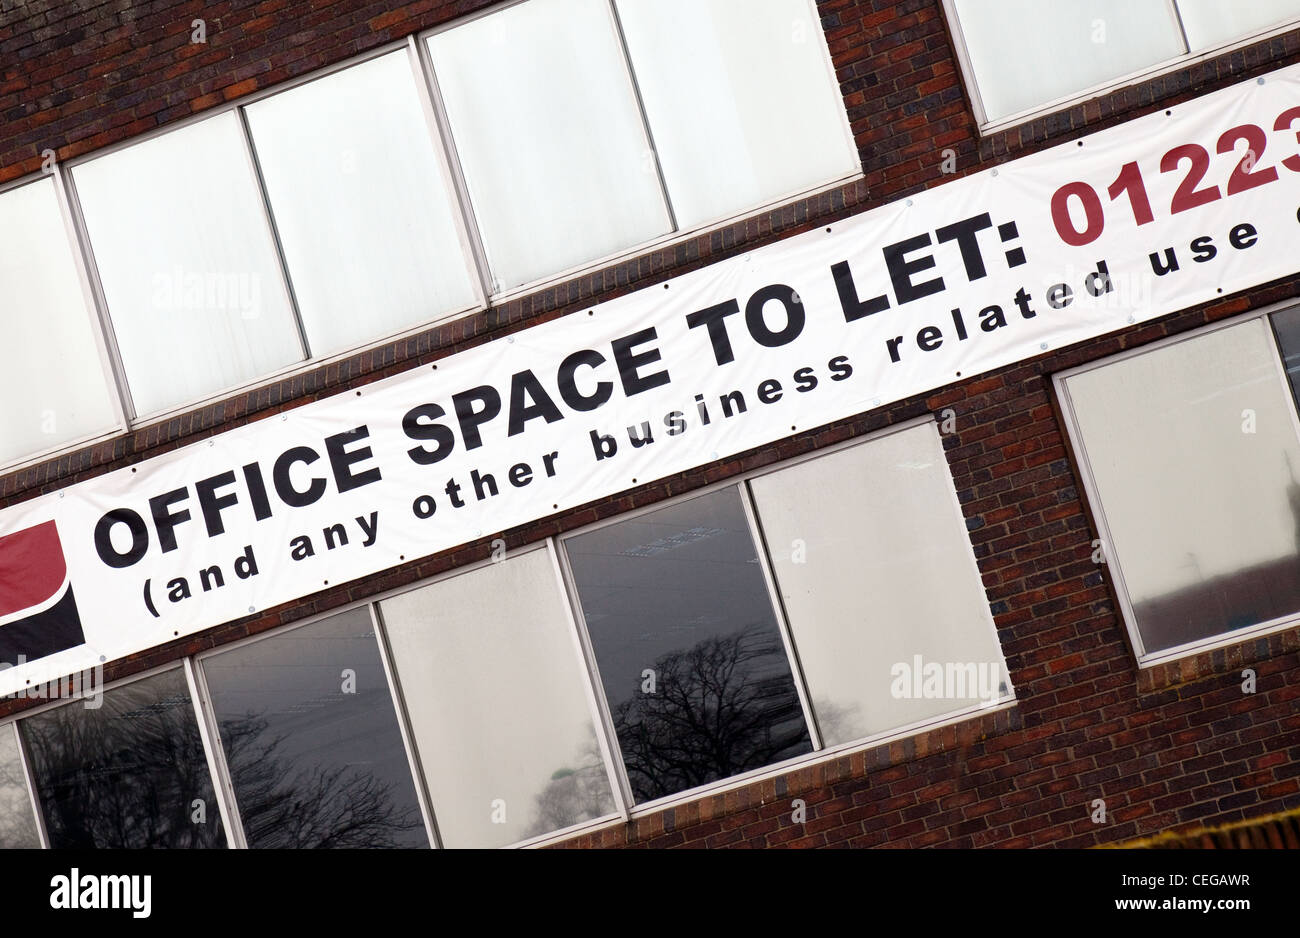 Office space to let sign, UK Stock Photo - Alamy